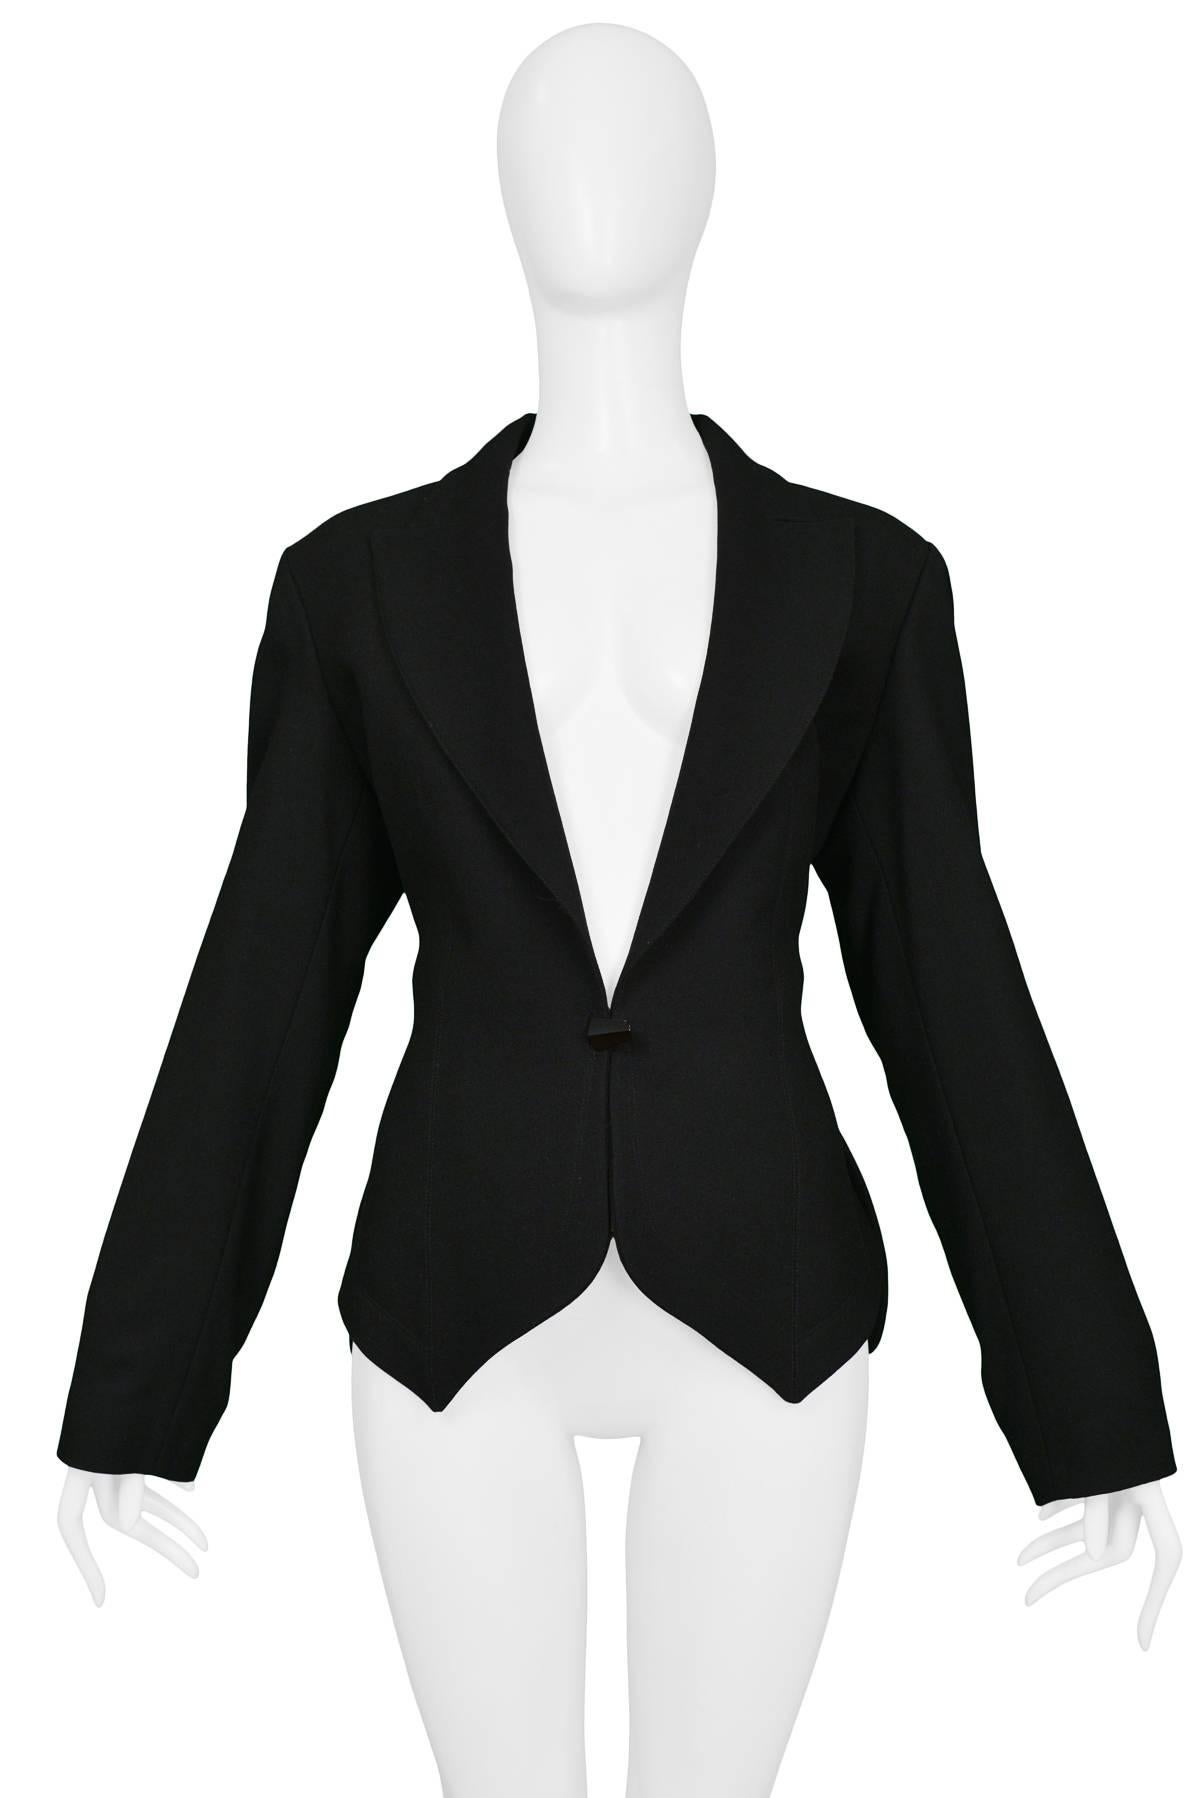 Vintage black Azzedine Alaia wool single breasted fitted blazer featuring a classic lapel collar, straight sleeves, and metal button closure. Collection 1991.

Condition : Excellent Vintage Condition

Size: 42

Measurements:
Shoulder 16.5